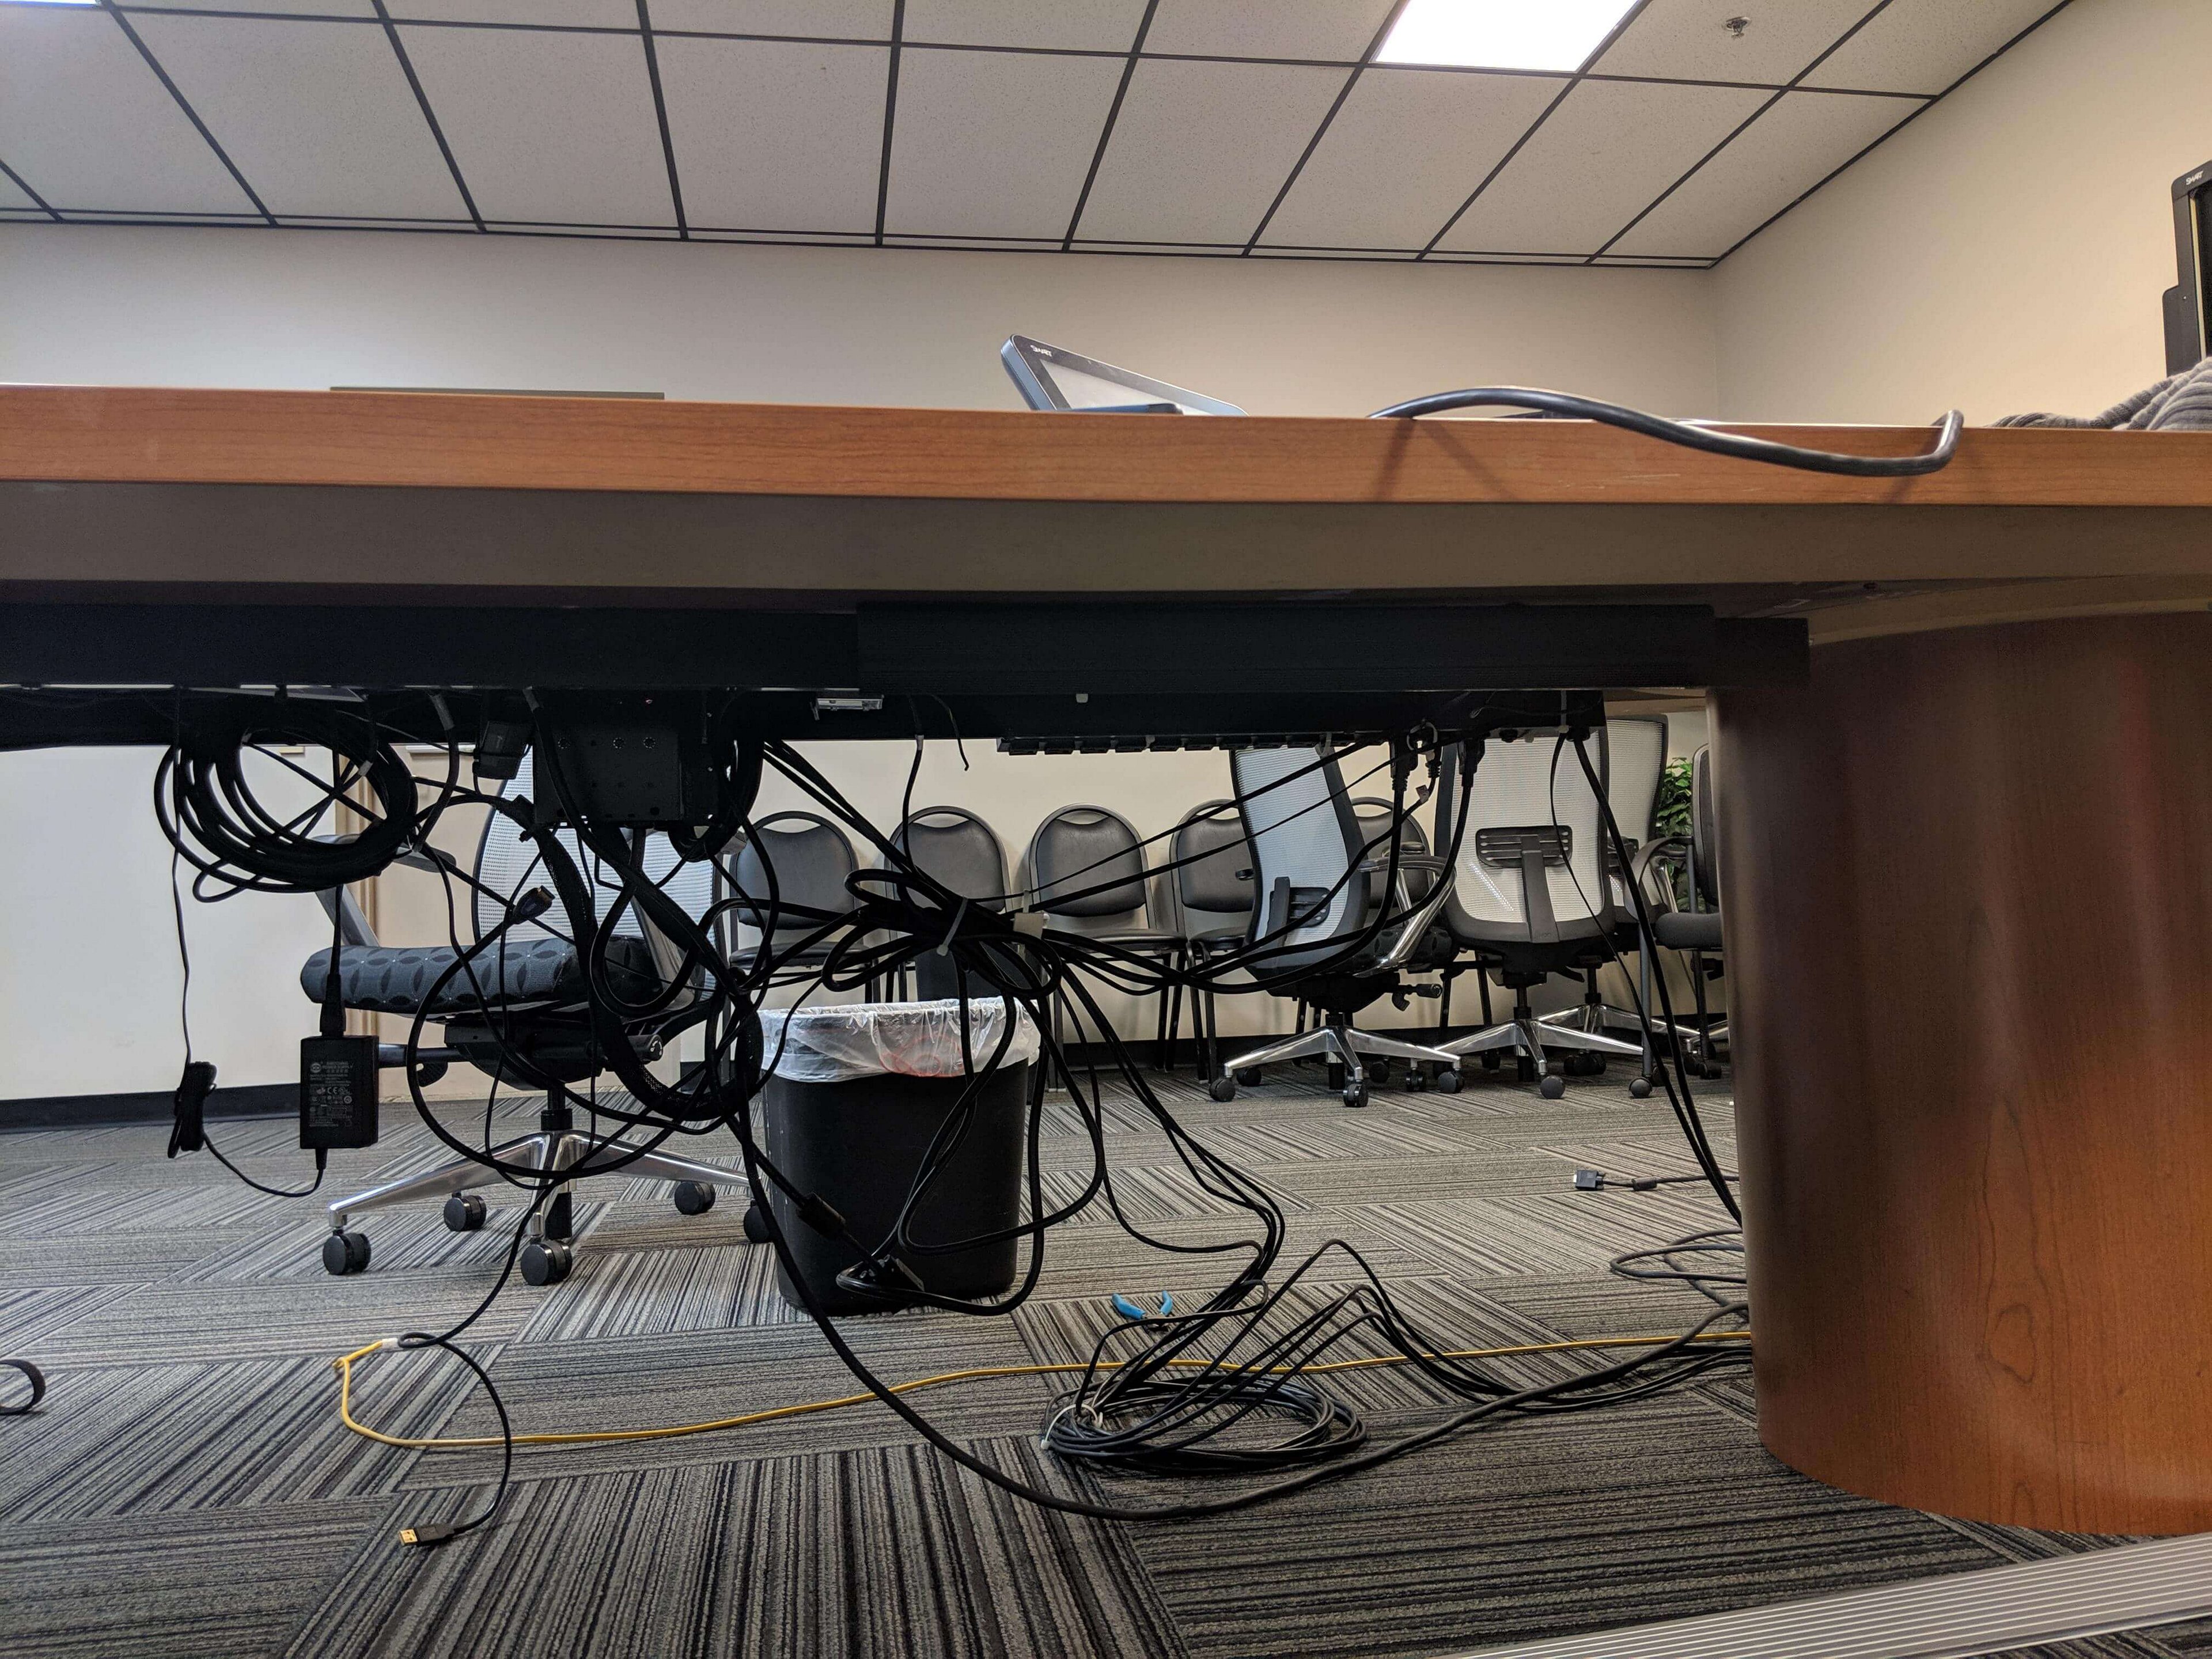 Our story of how a $1,000 Wireless Presentation System ended up costing less than a single HDMI cable.